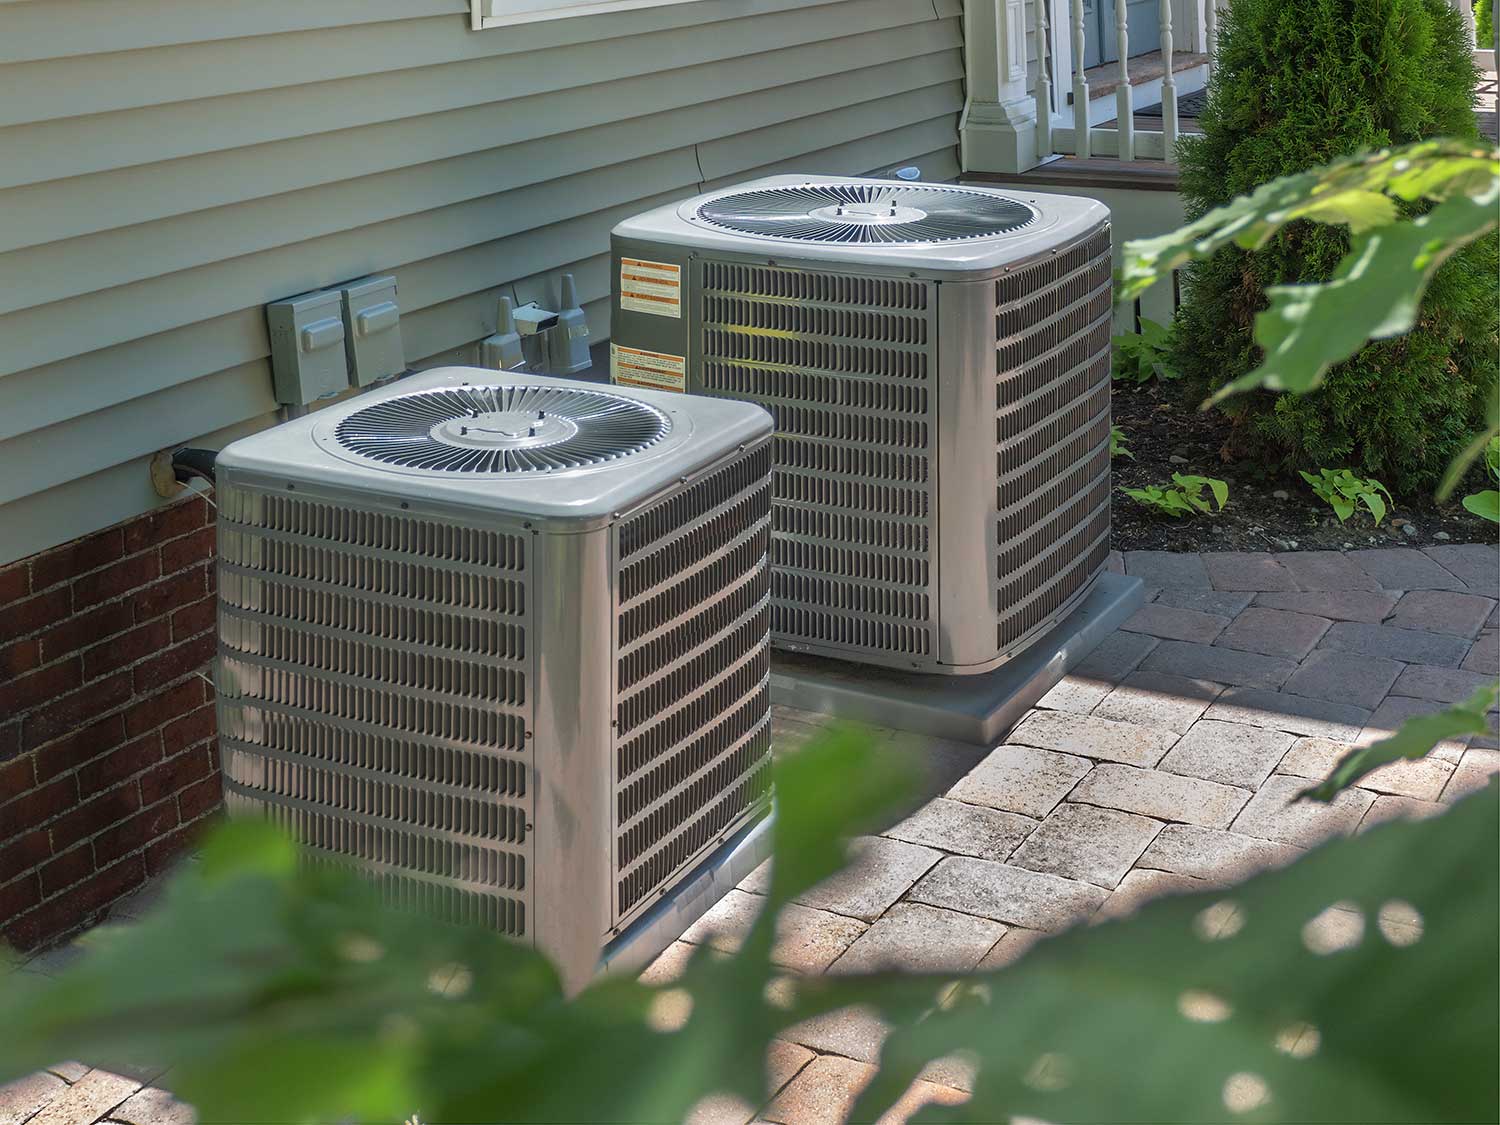 Heating, Ventilation as well as A/C system makes living near the airport tolerable